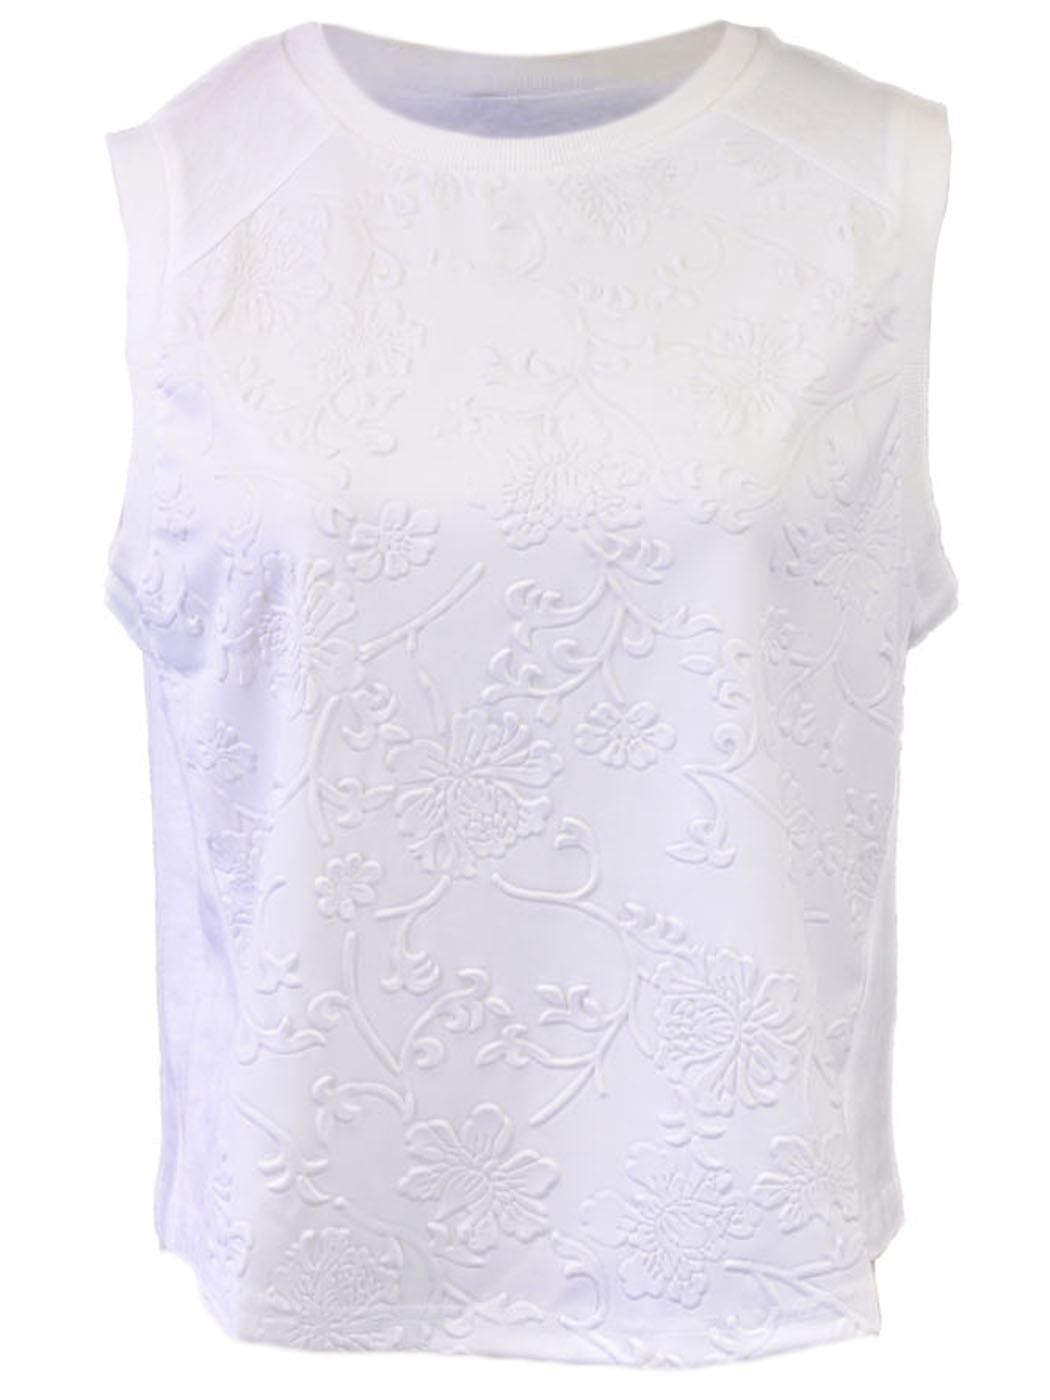 Cotton Candy Casual Floral Print Design Sleeveless White Cropped Top - ALILANG.COM